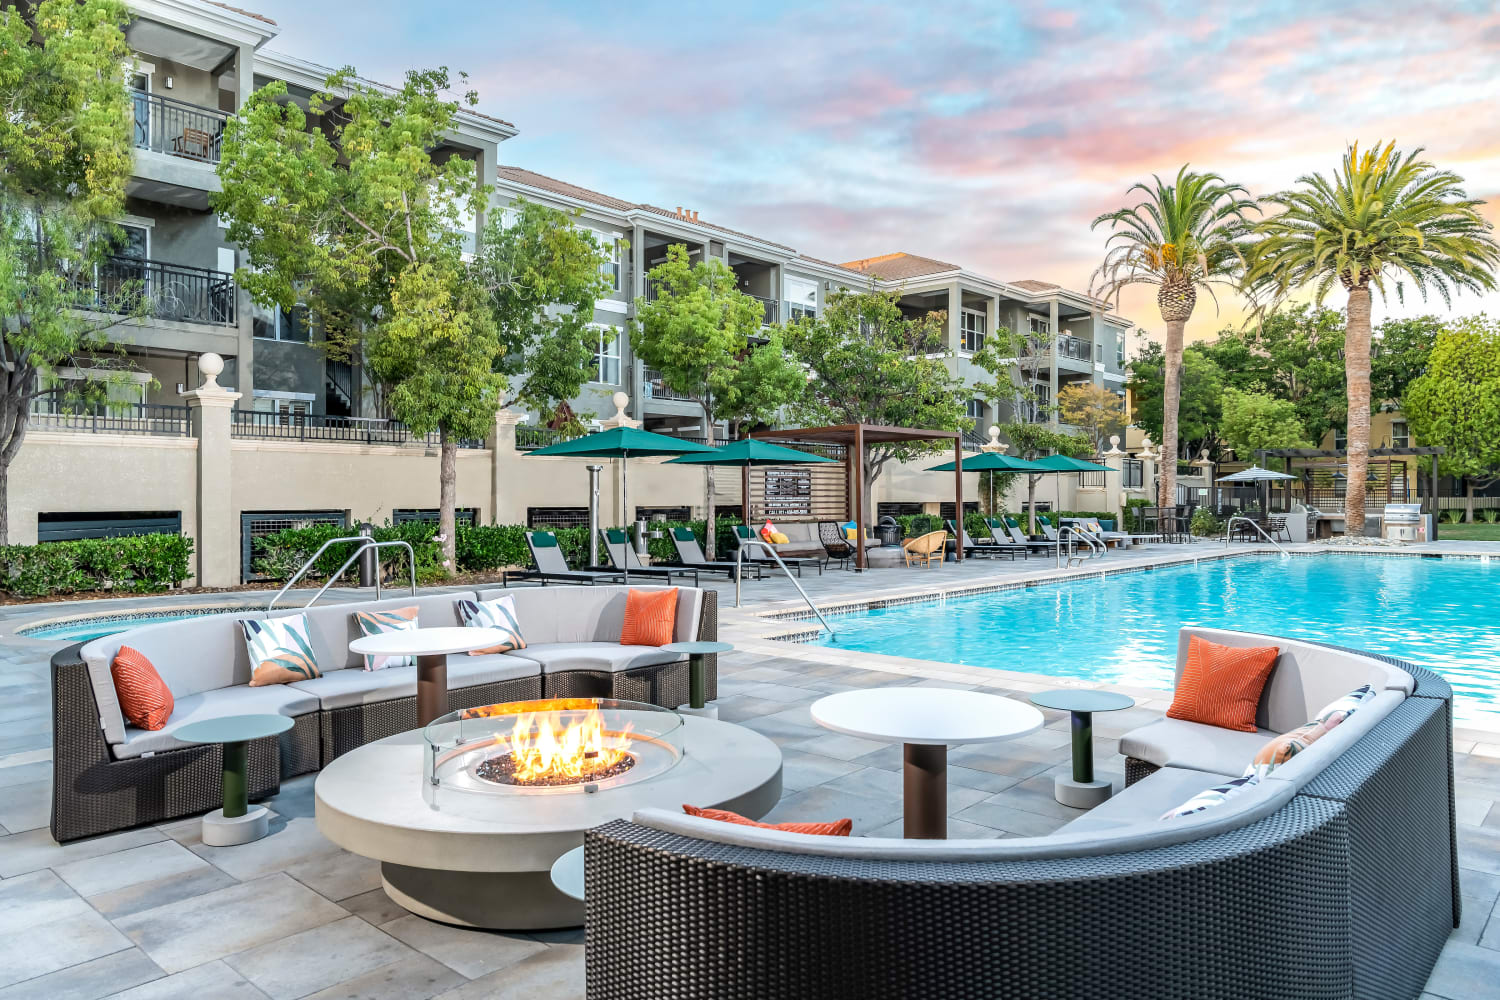 Community sitting area with comfortable couches beside pool at The Carlyle in Santa Clara, California